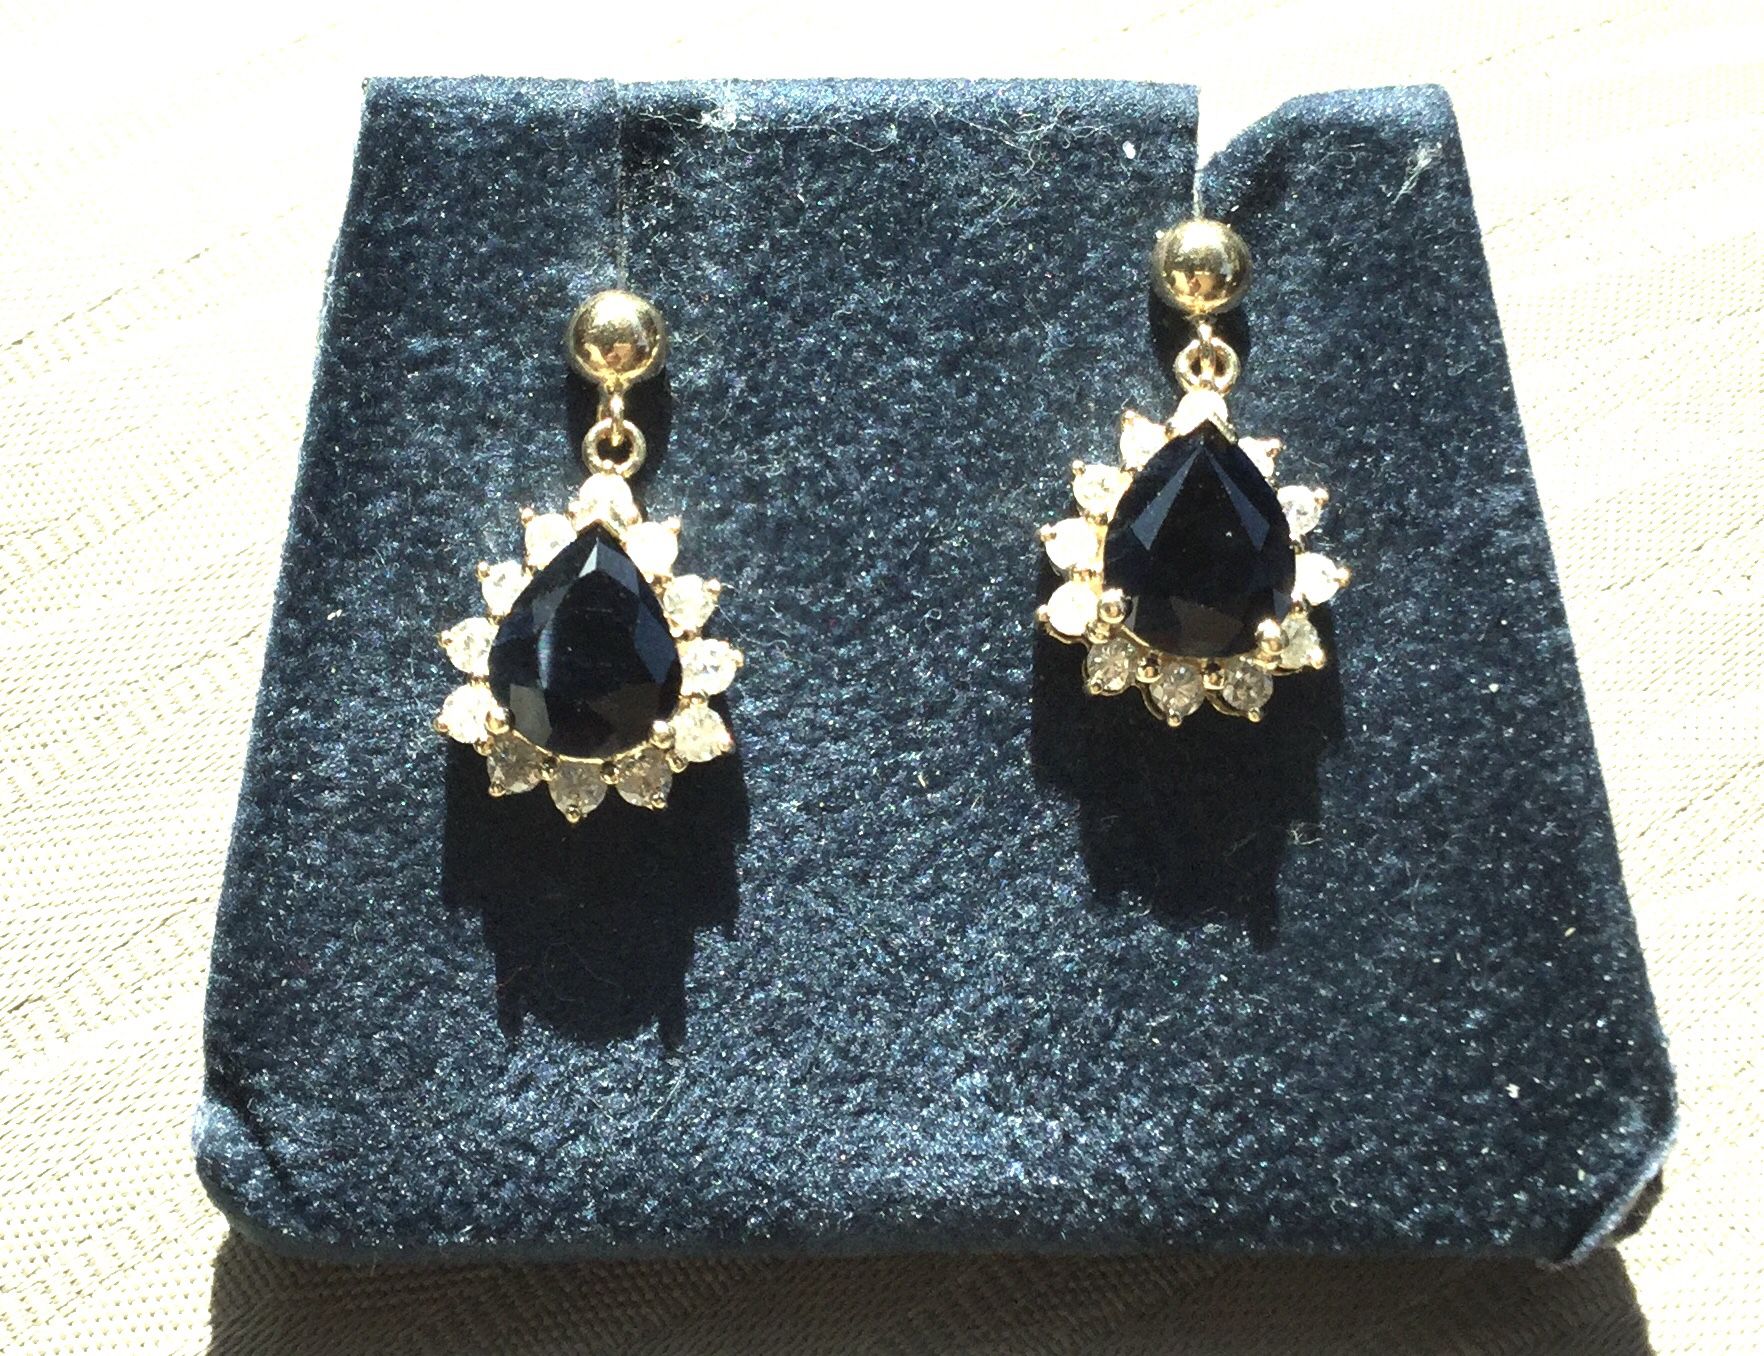 Laura Ramsey 14k Yellow Gold Sapphire Diamonds earrings, updated information verified by Local Gig Harbor Jeweler.